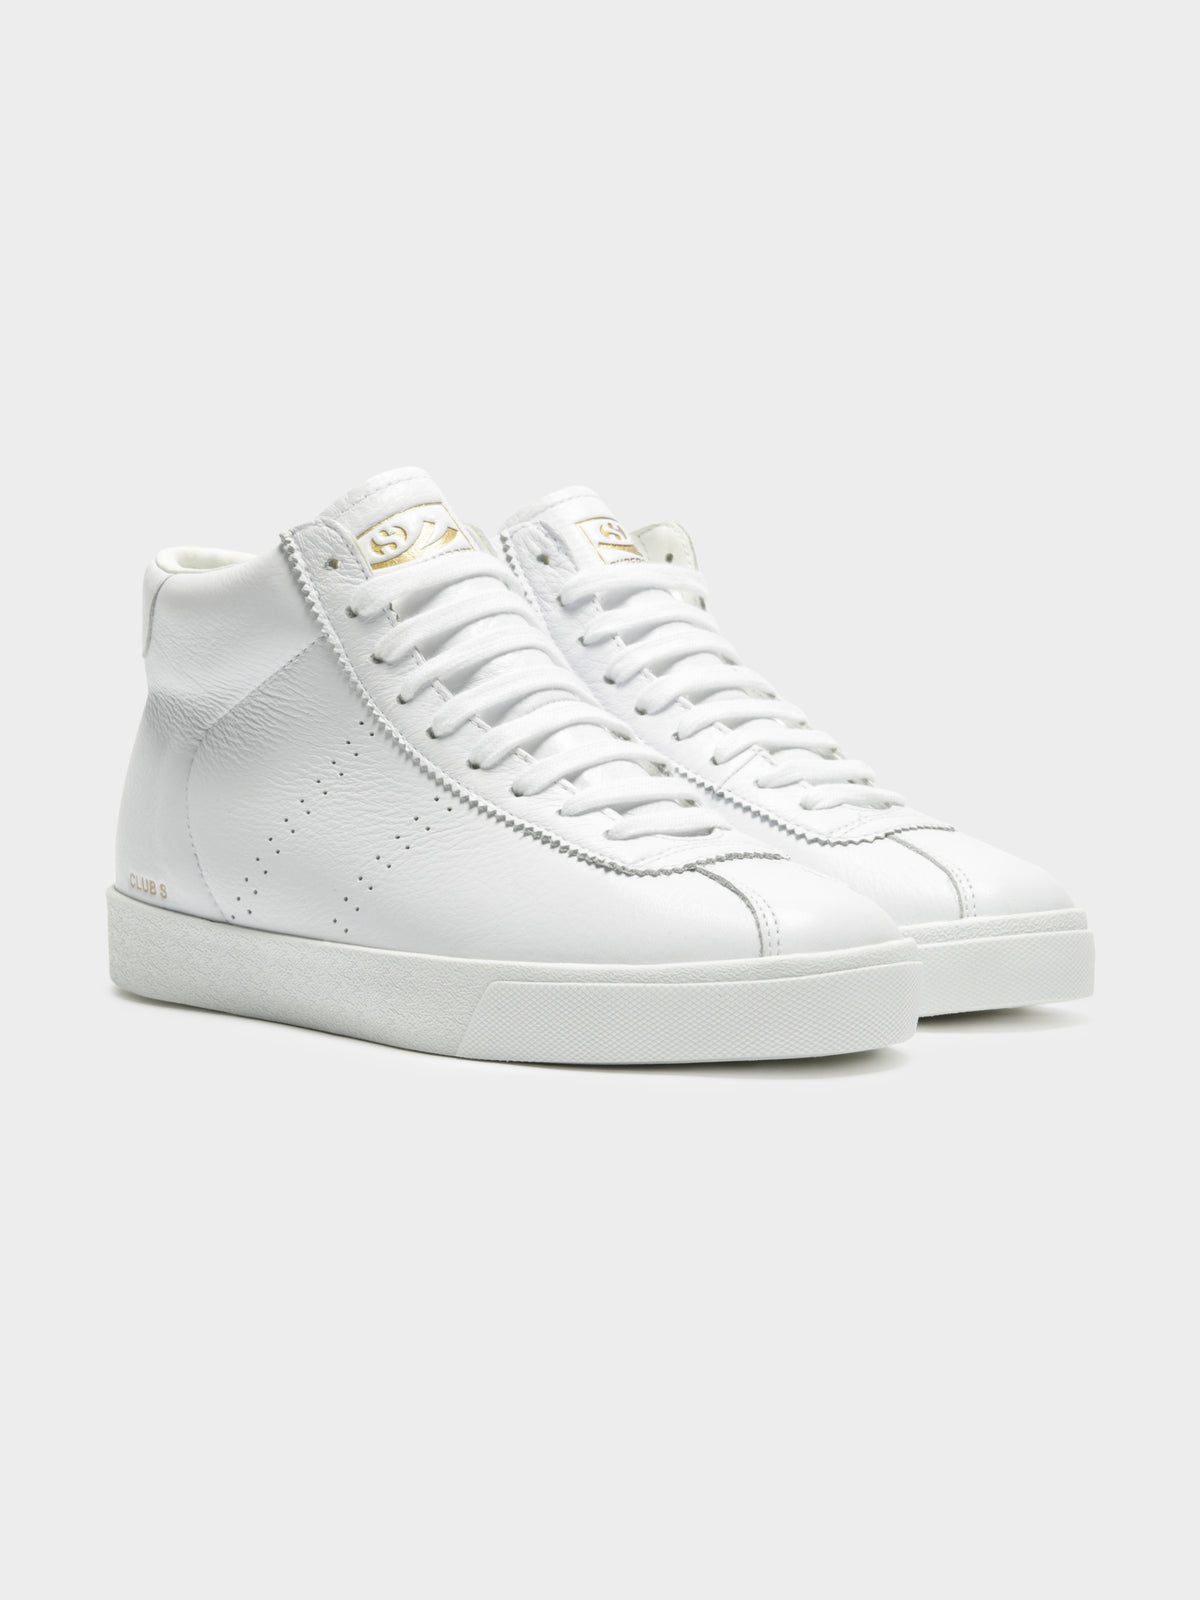 Womens 2871 Club S Comfleau High Top Sneakers in White